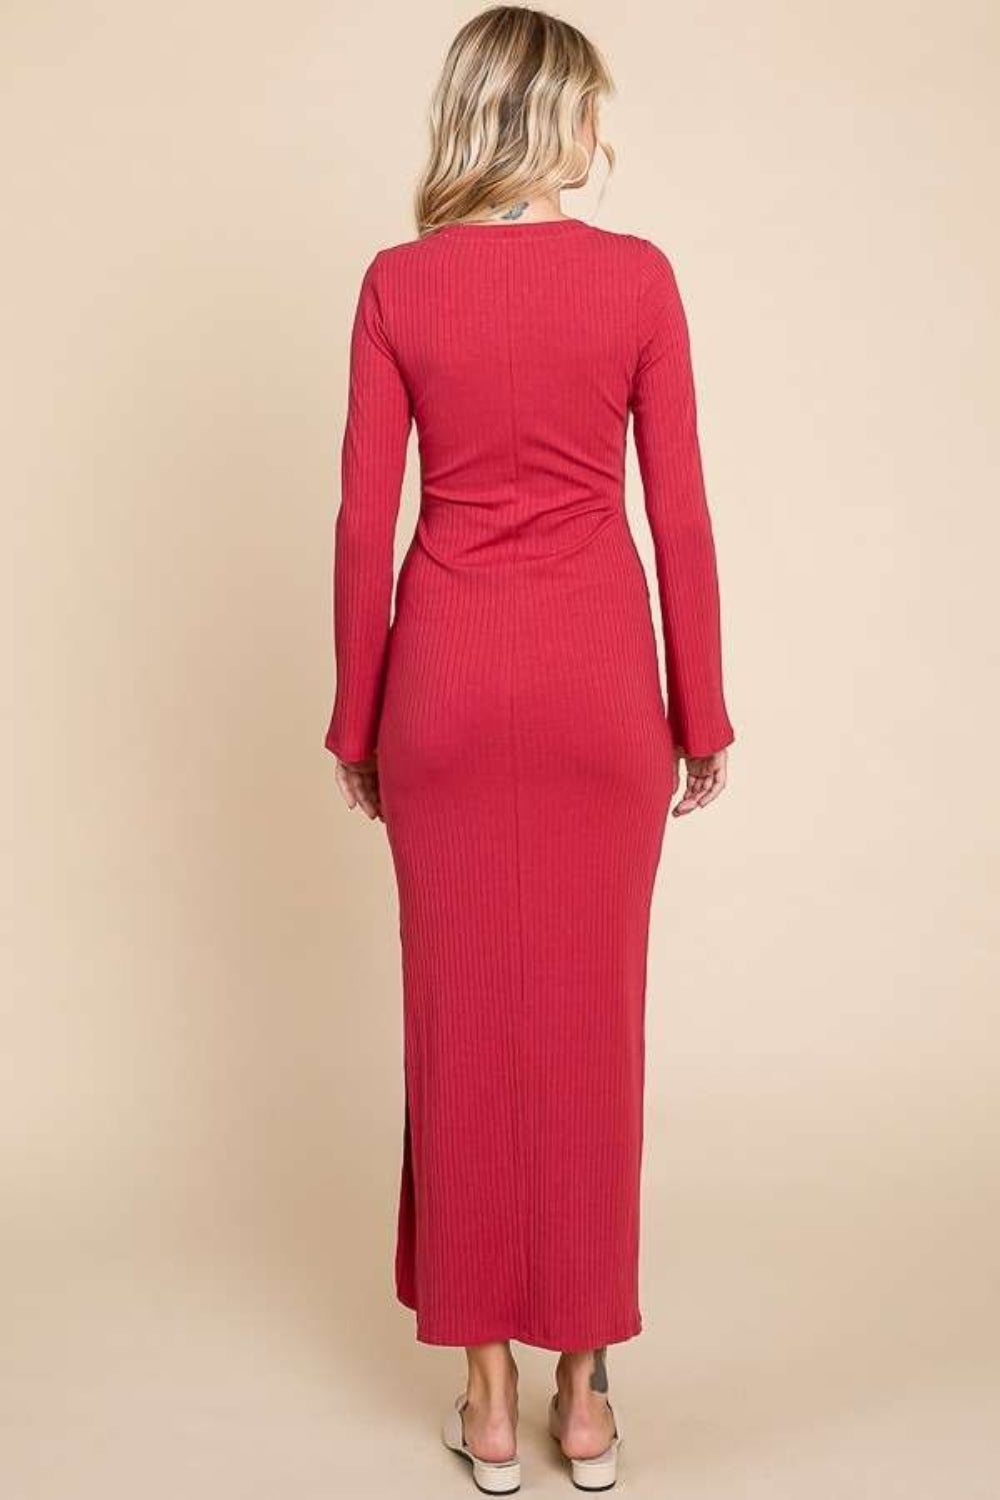 Elegant Full-Length Round Neck Bell-Sleeve Bodycon Maxi Dress for Beach Wedding Guests